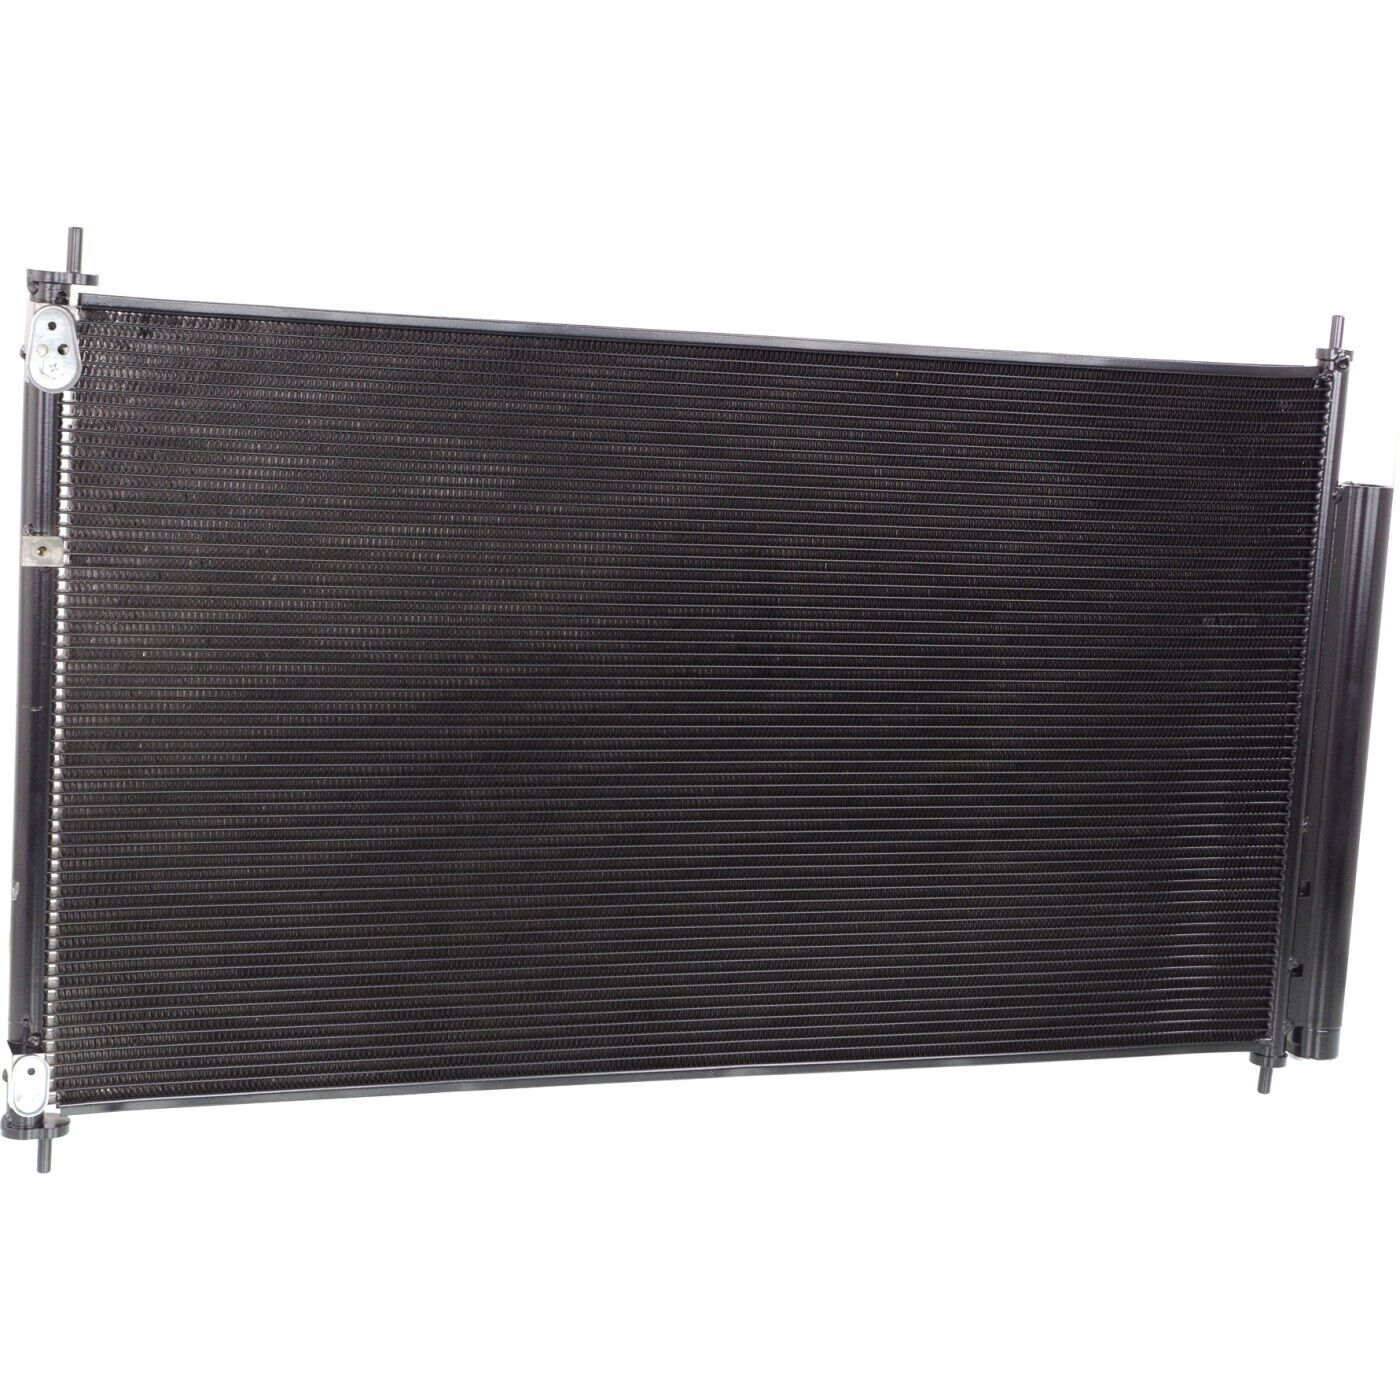 AC Condenser For 2005-2010 Honda Odyssey With Receiver Drier Aluminum Core